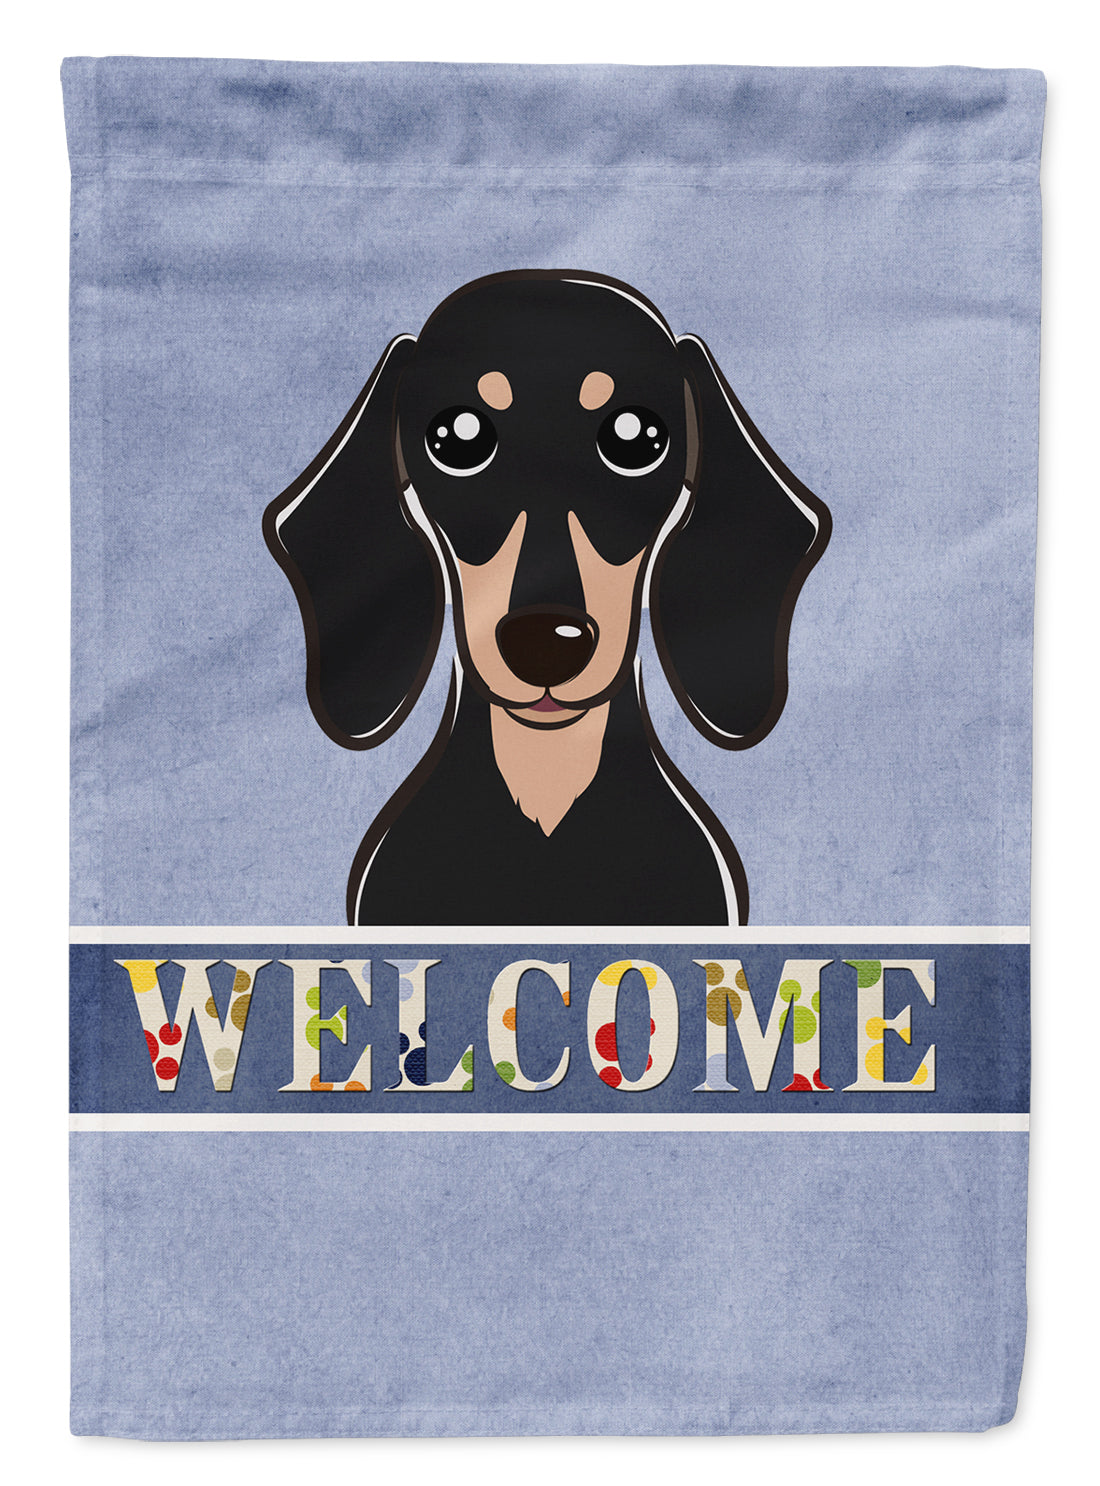 Smooth Black and Tan Dachshund Welcome Flag Garden Size BB1401GF.